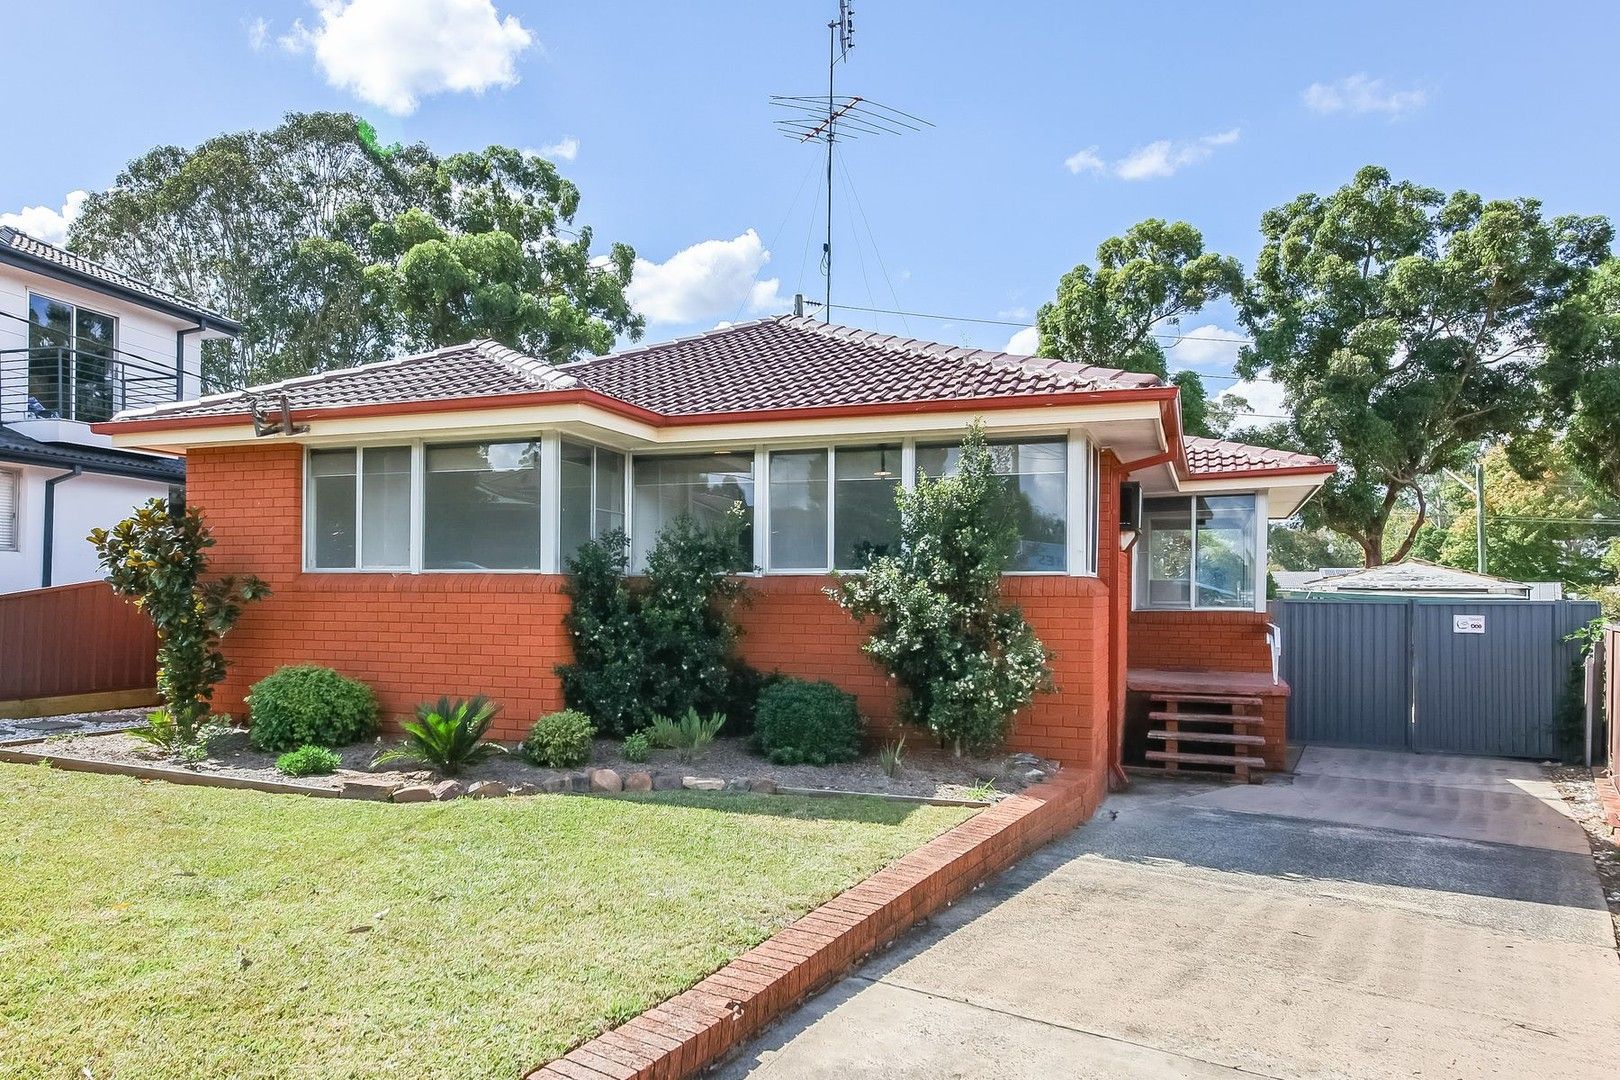 3 bedrooms House in 58 Berallier Drive CAMDEN SOUTH NSW, 2570